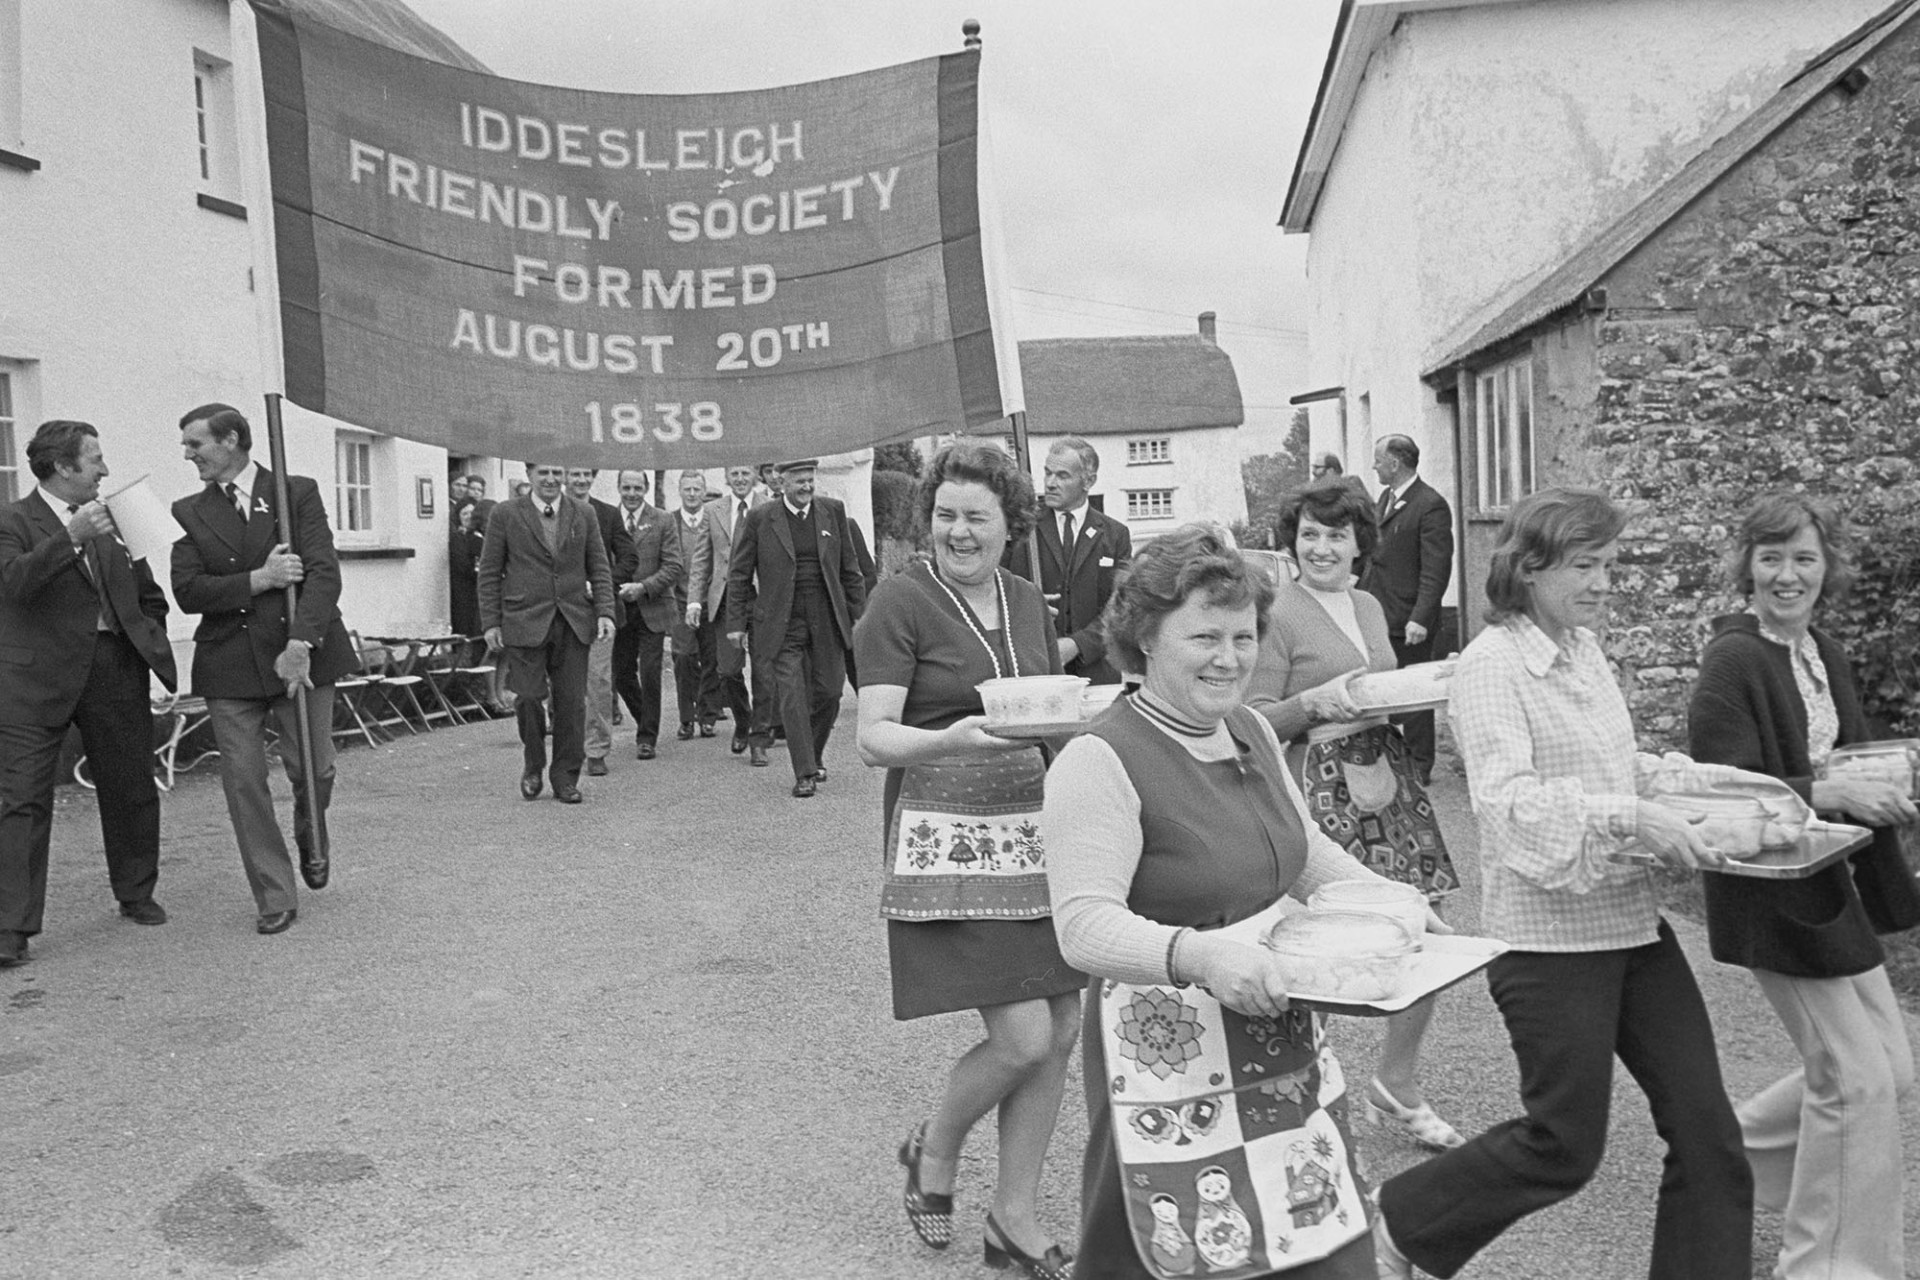 Friendly Society Members and bandsmen. Women parading the mashed potatoes to the lunch.
[Women carrying trays of food and men carrying an Iddesleigh Friendly Society banner in the Iddesleigh Club Day parade.]